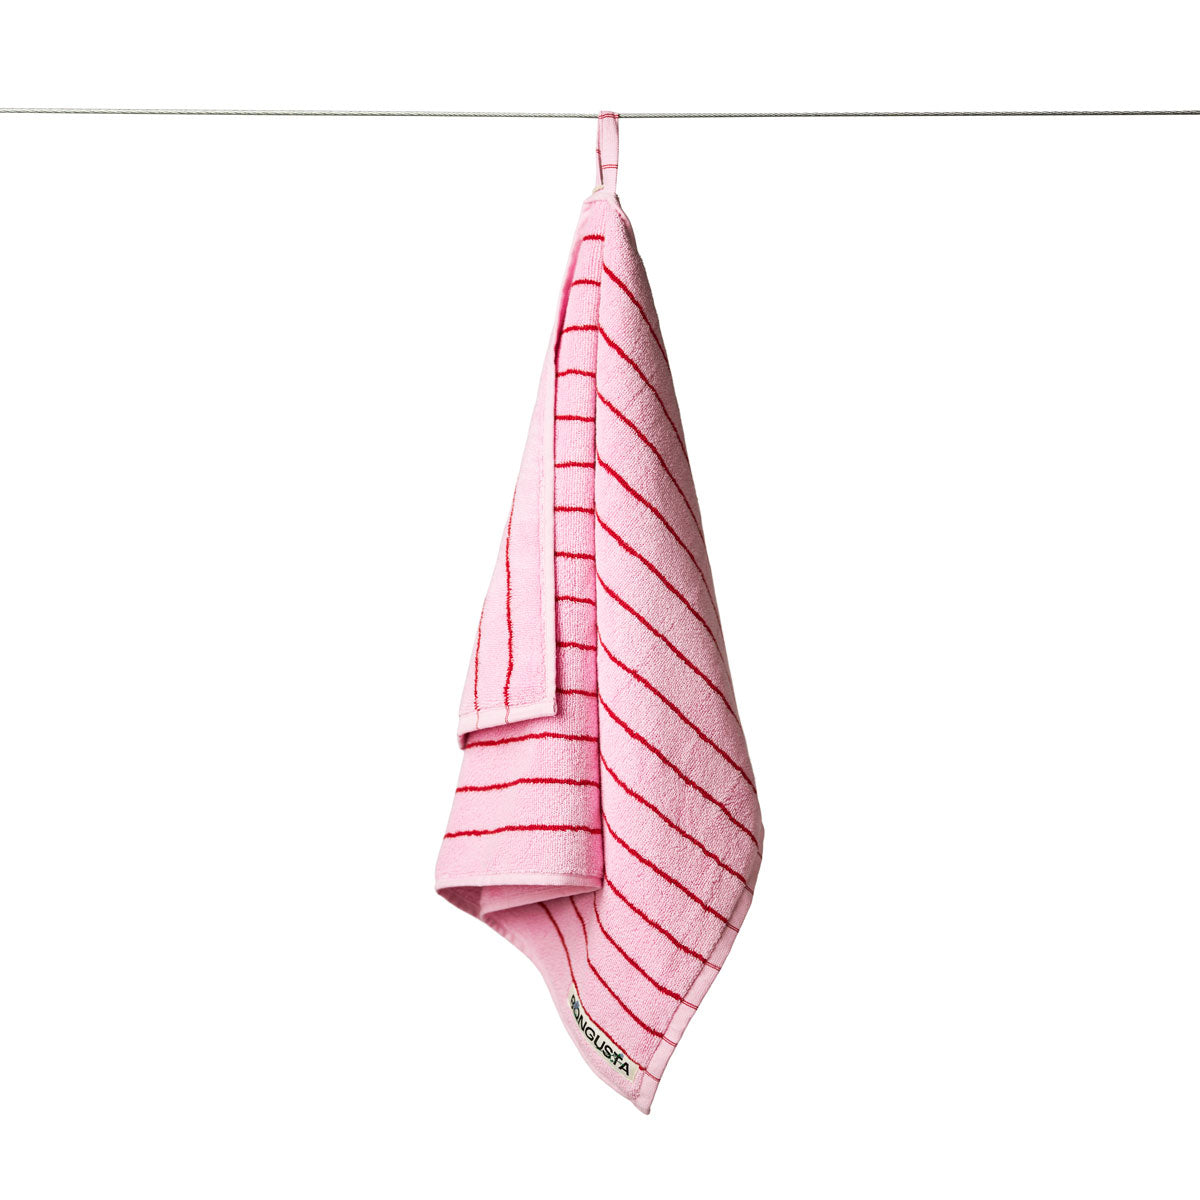 Bongusta Naram Towels - Baby Pink and Red